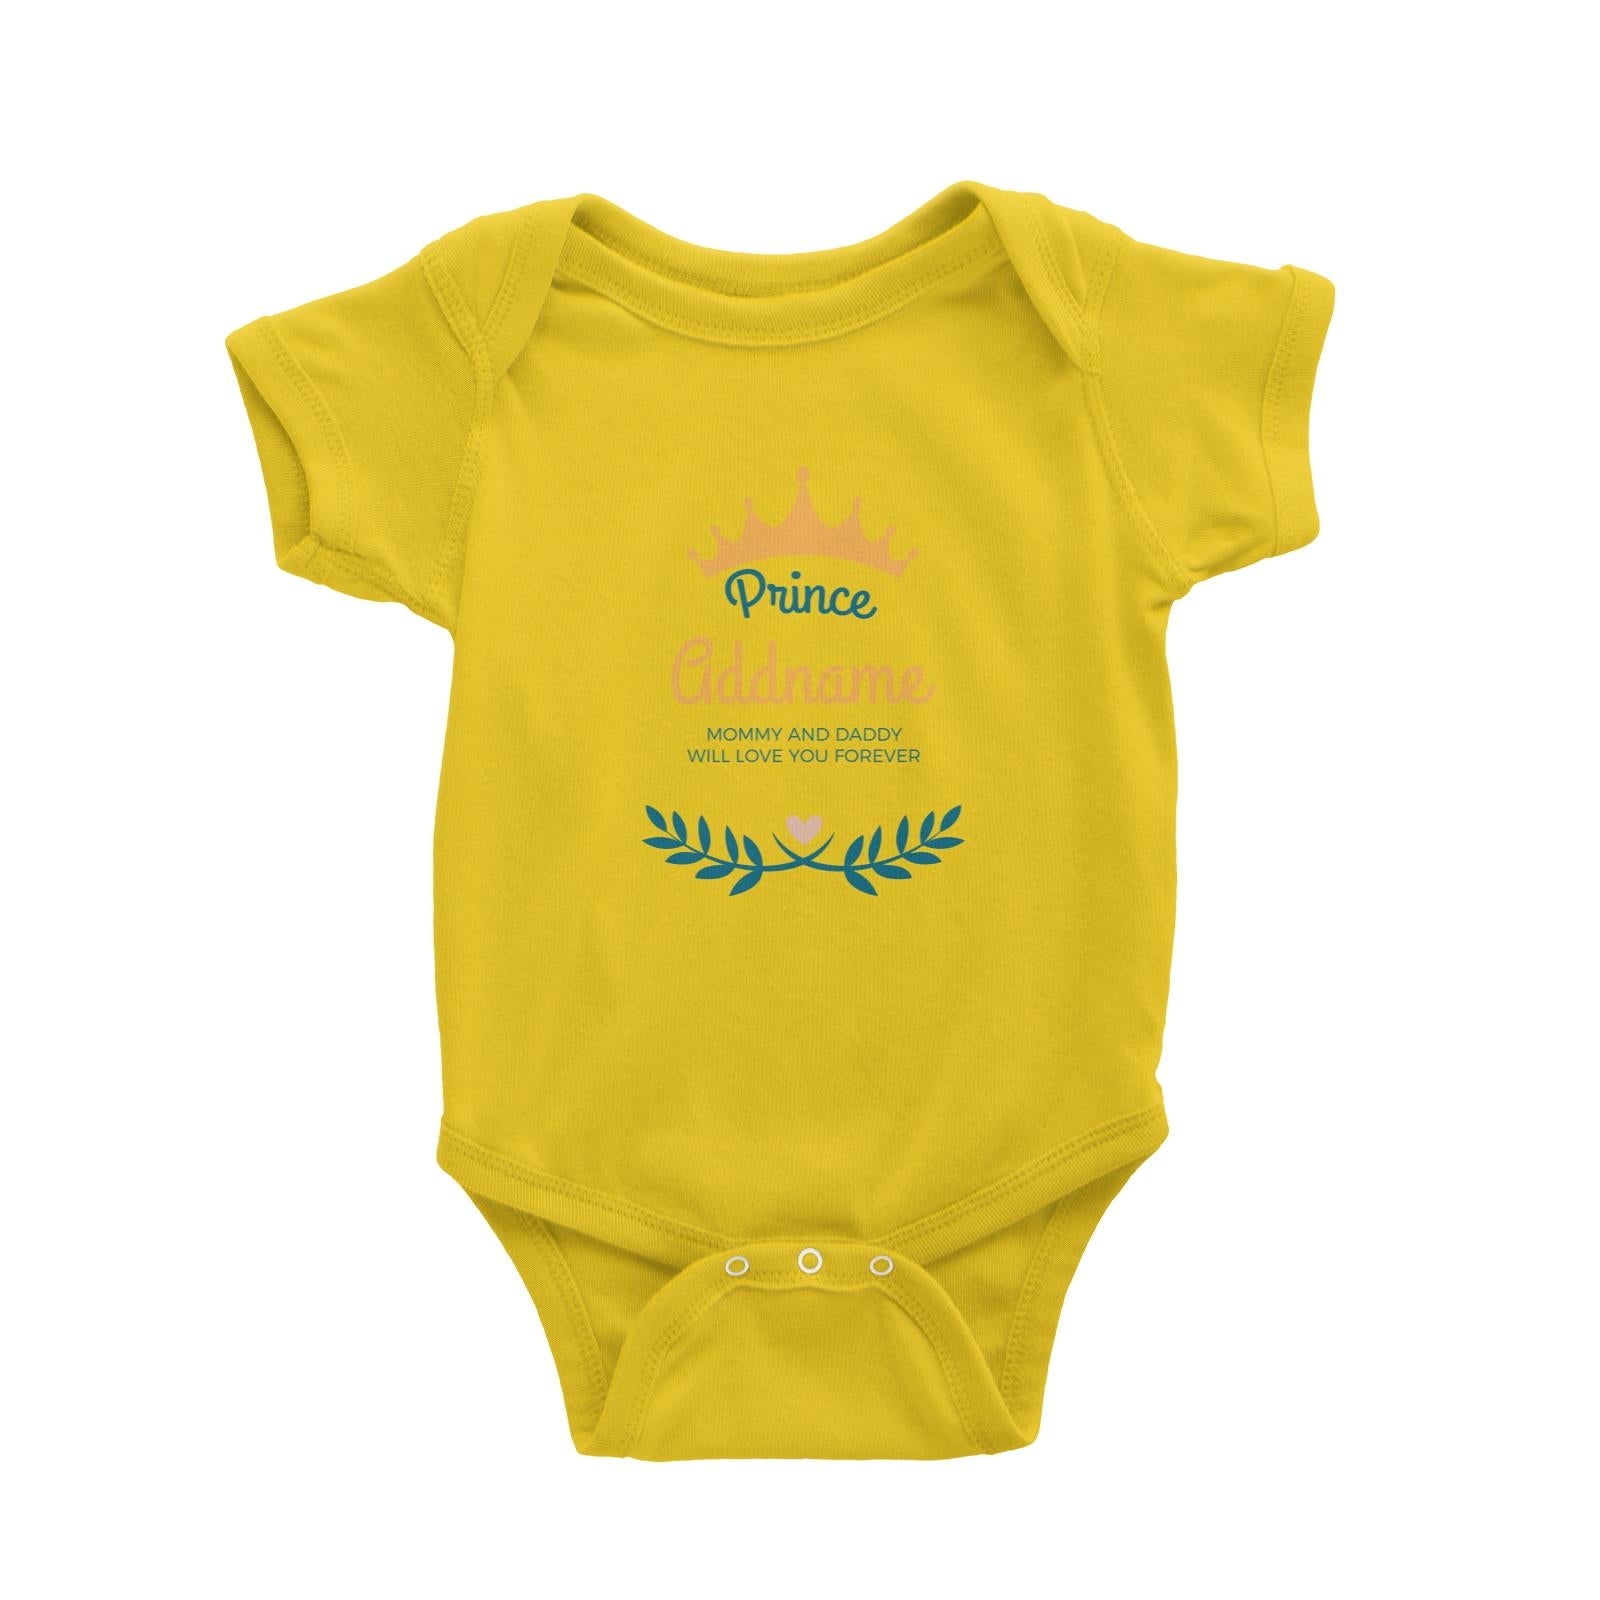 Prince with Crown and Blue Leaves Personalizable with Name and Text Baby Romper